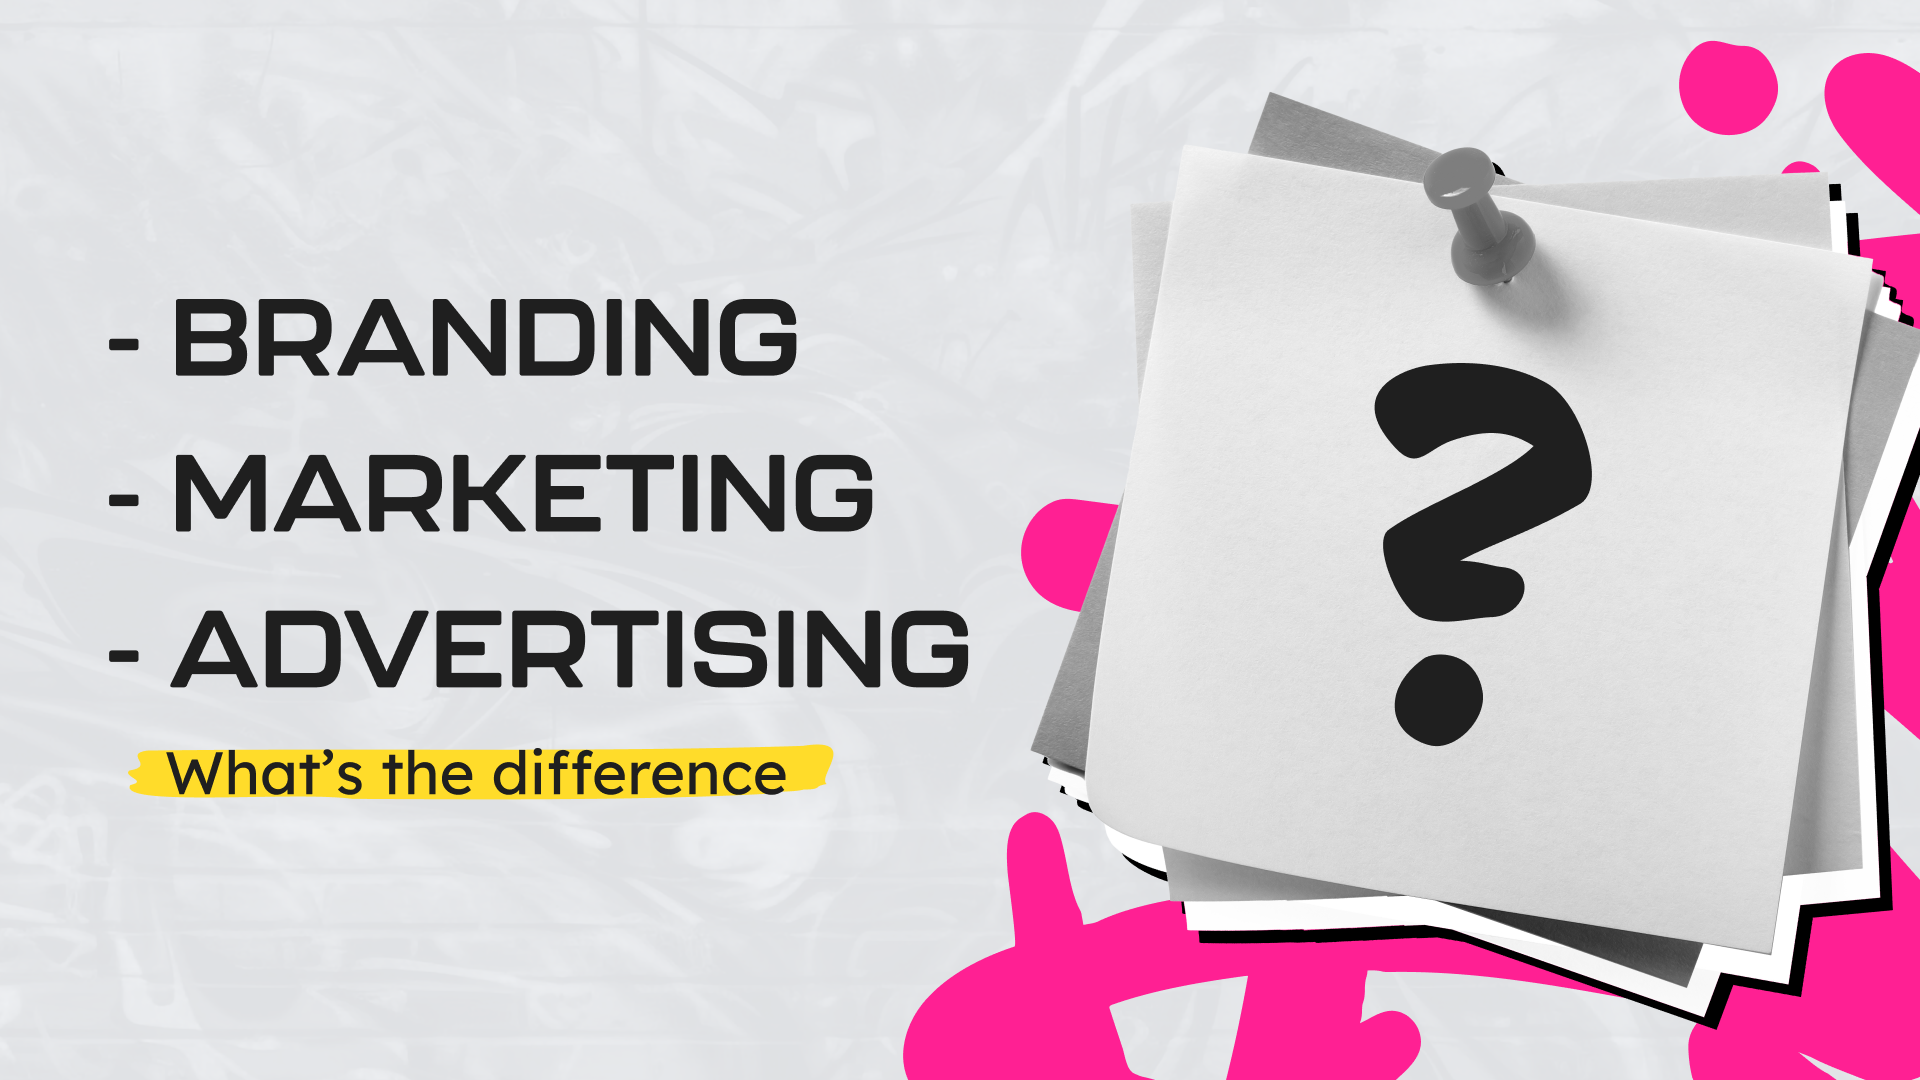 Branding, Marketing, & Advertising: What’s the Difference?